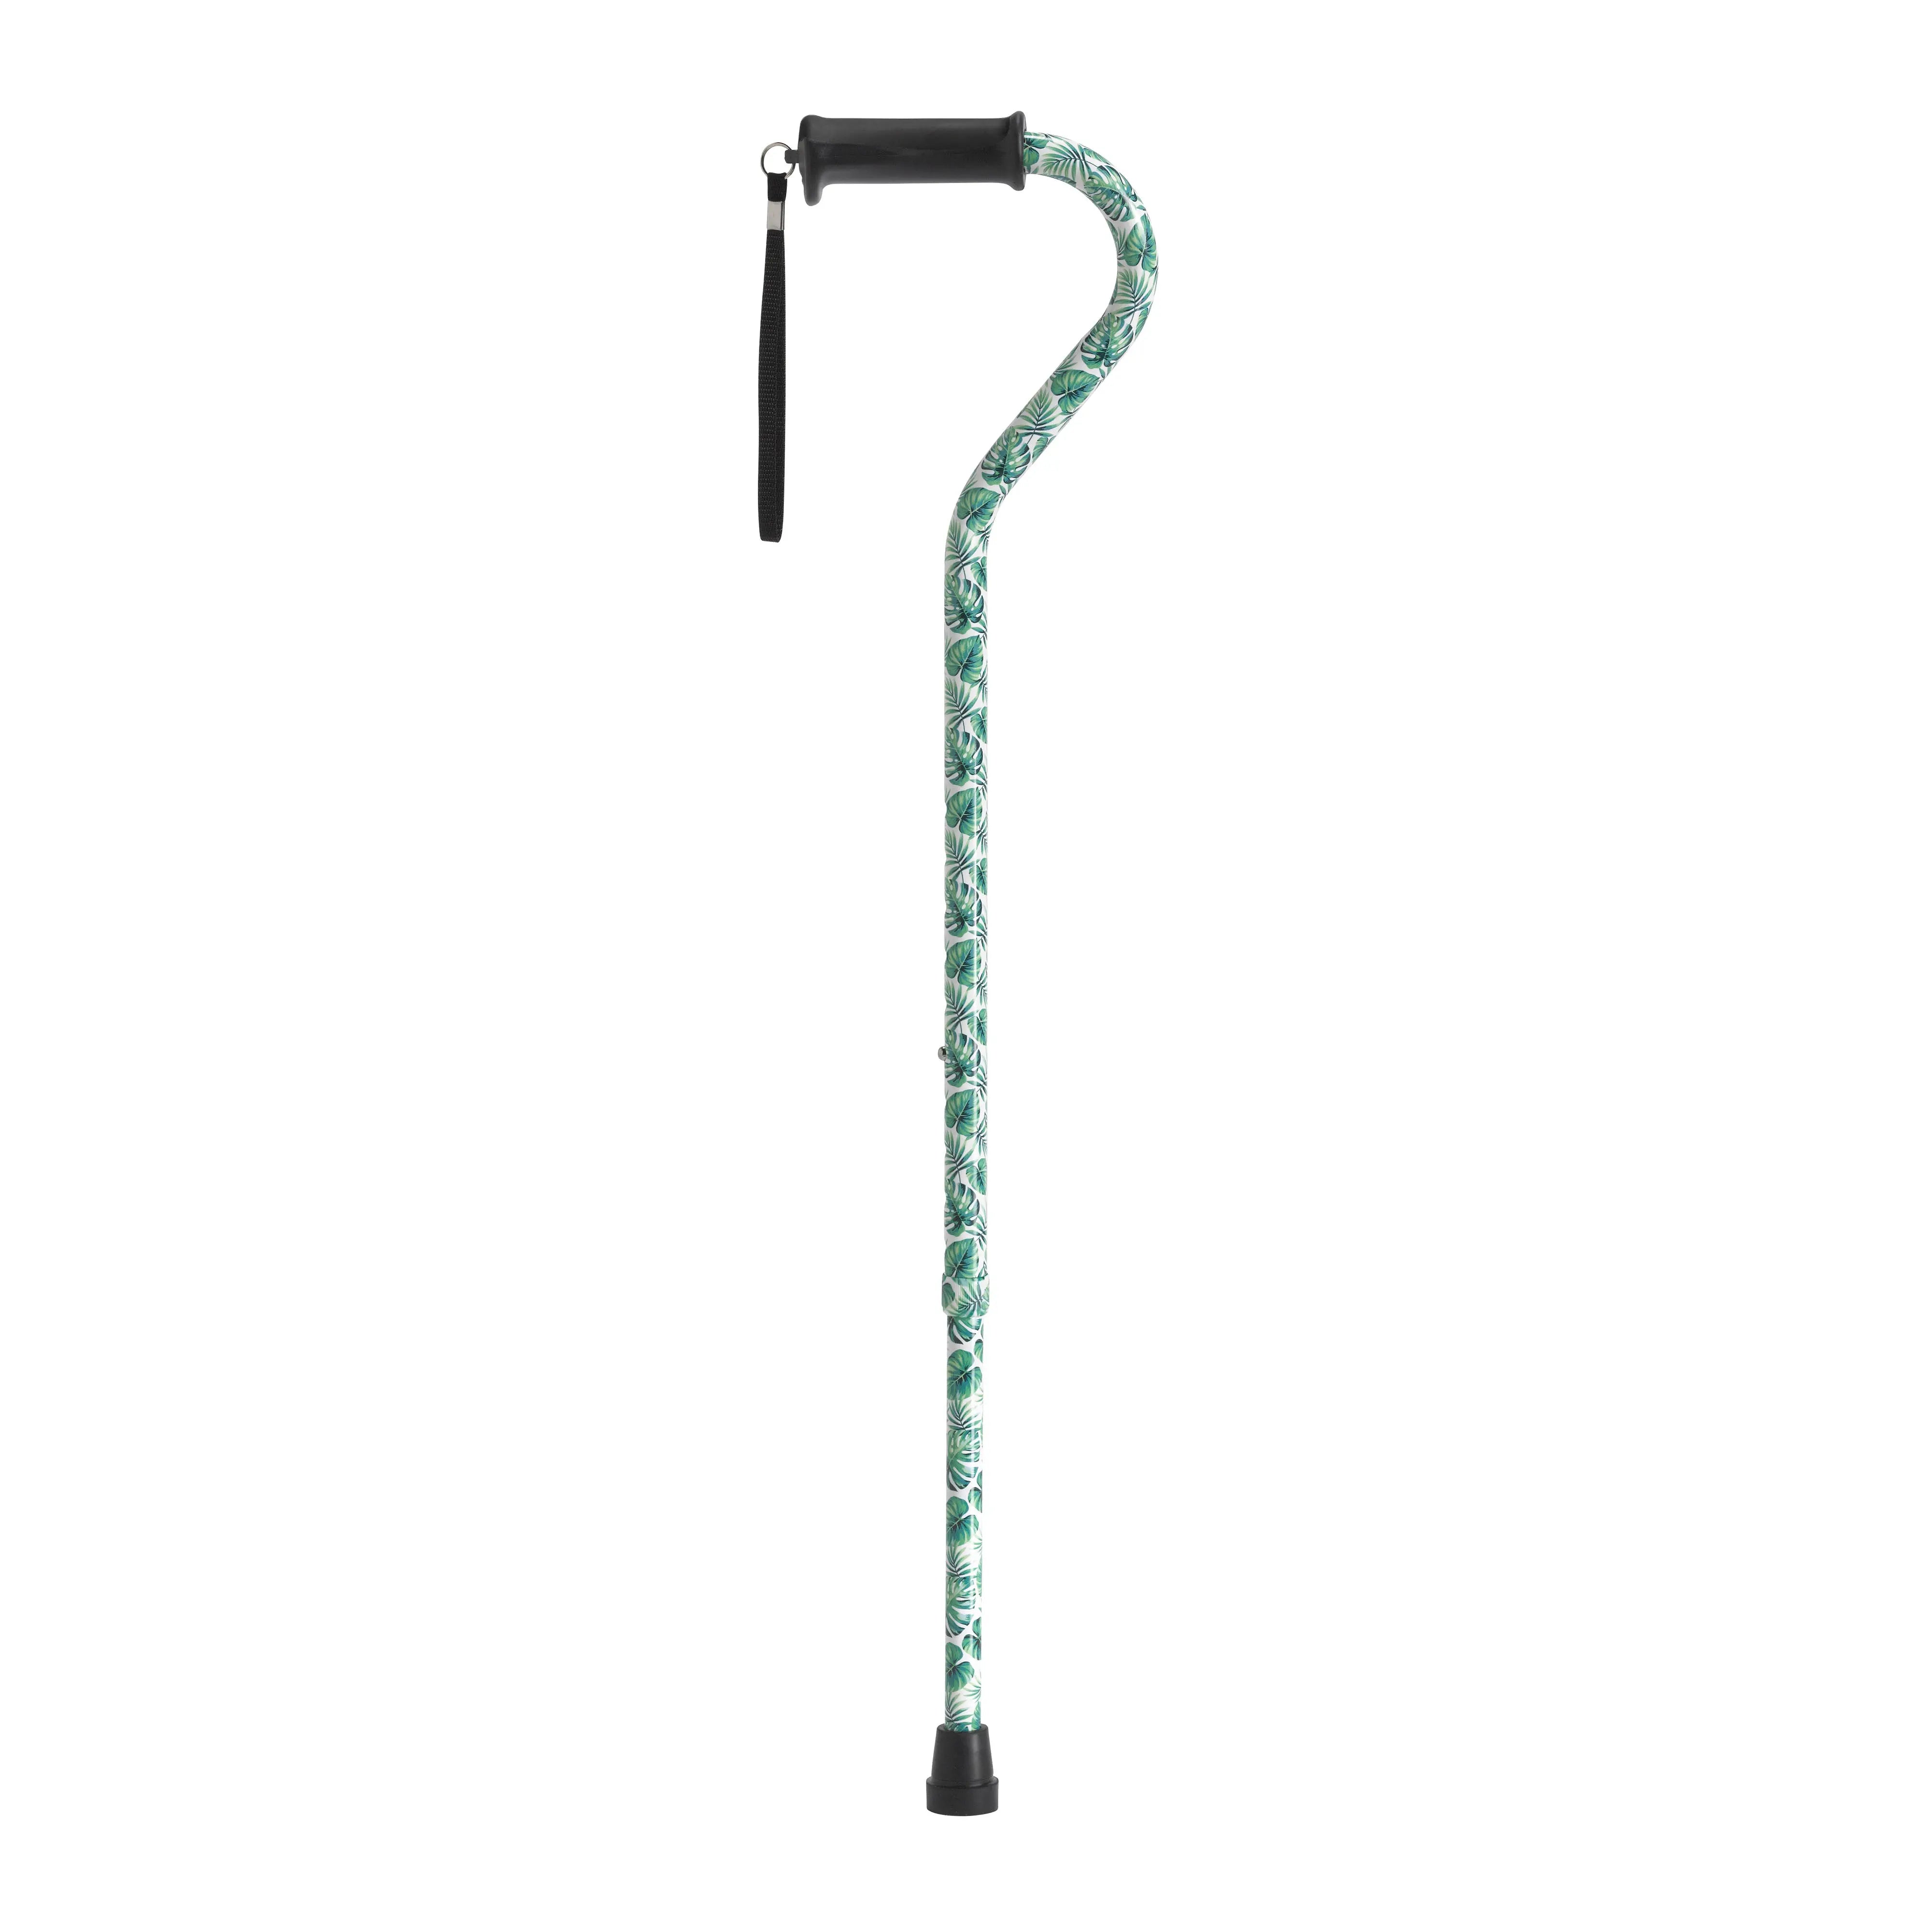 Adjustable Height Offset Handle Cane with Gel Hand Grip - Home Health Store Inc